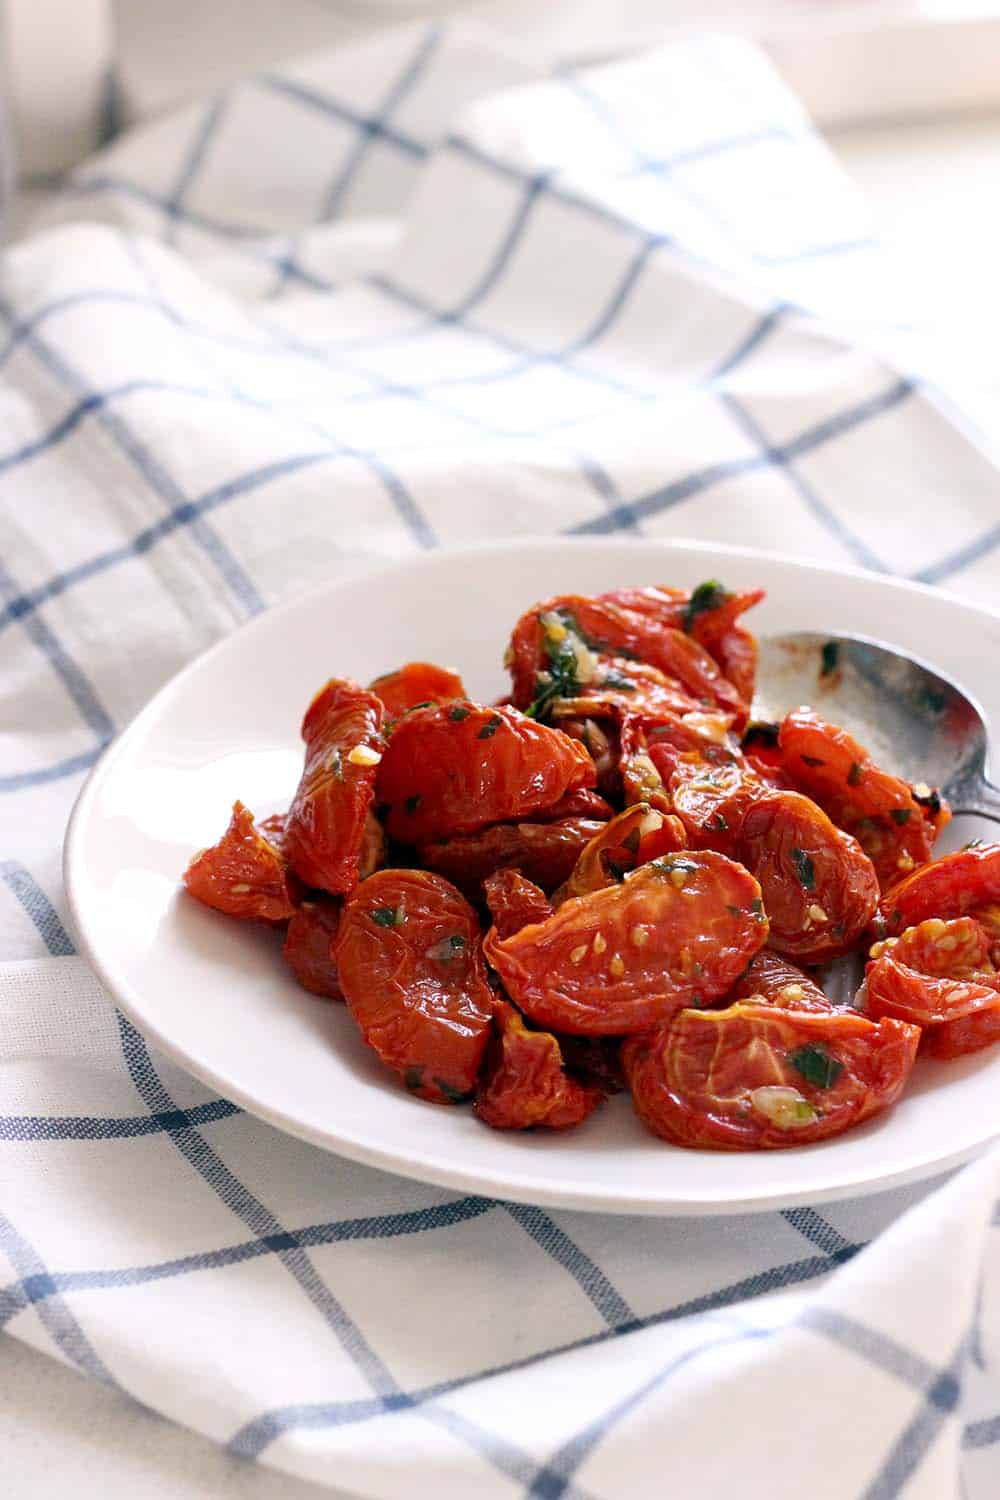 These Oven Dried Tomatoes, like sun dried, have a deep, smoky flavor and are covered in a delicious garlic and herb infused olive oil. Put them in salads, on pizza, or in sandwiches. Paleo, whole30, and healthy!